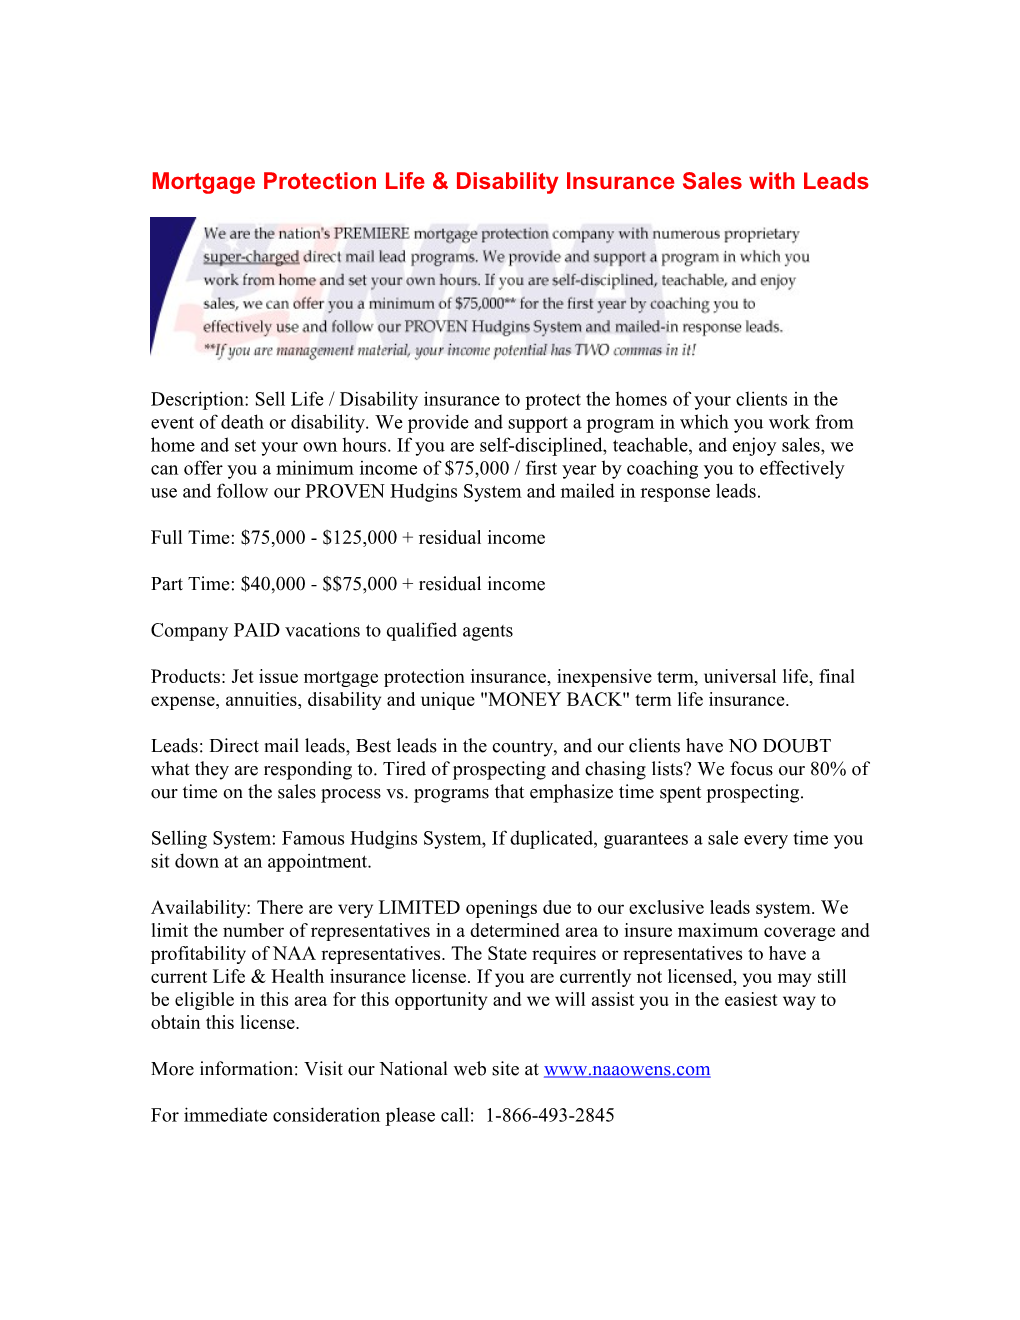 Mortgage Protection Life & Disability Insurance Sales with Leads